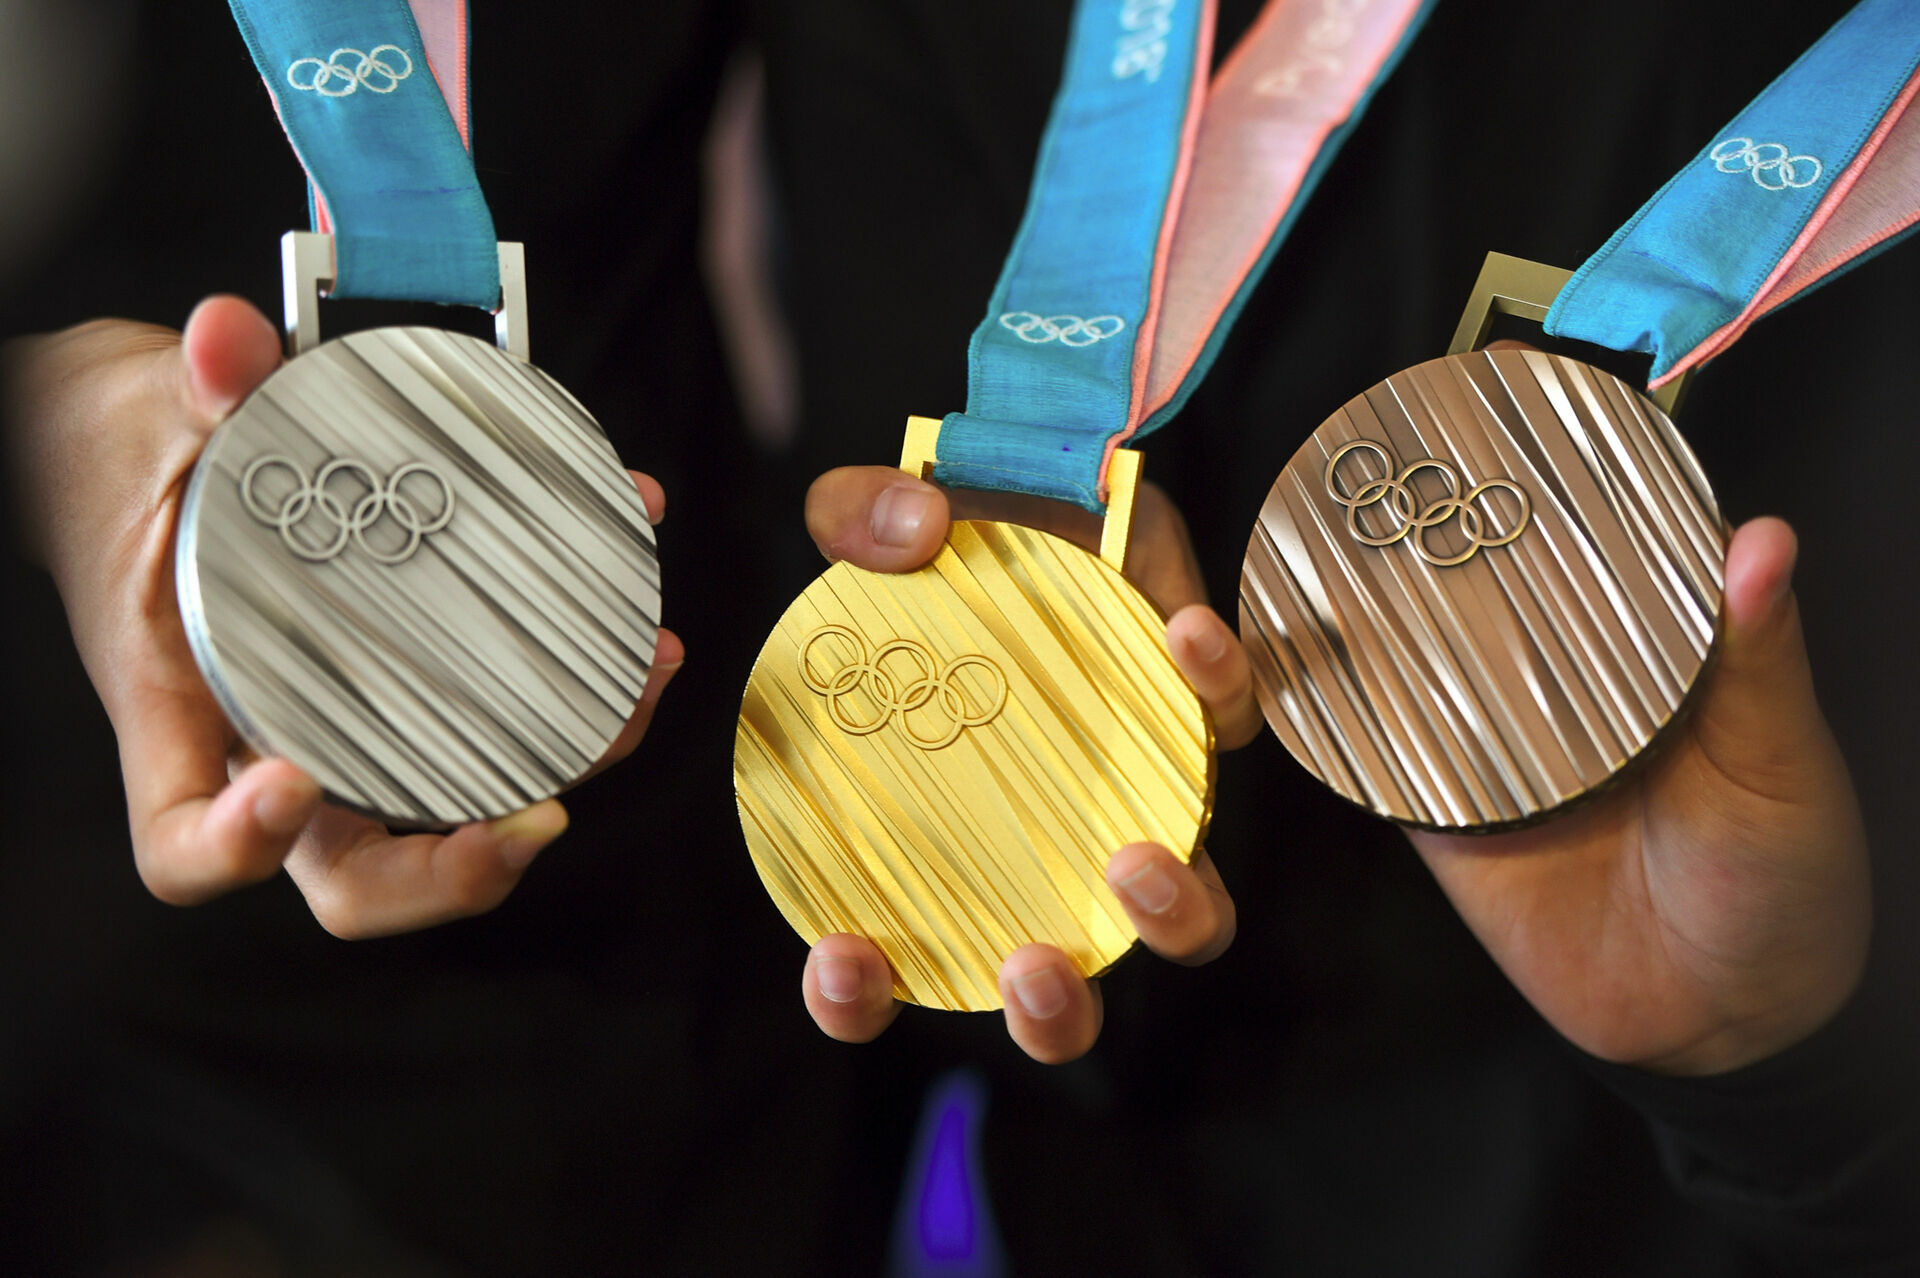 The Russian national team won six medals on the seventh competitive day of the Olympics